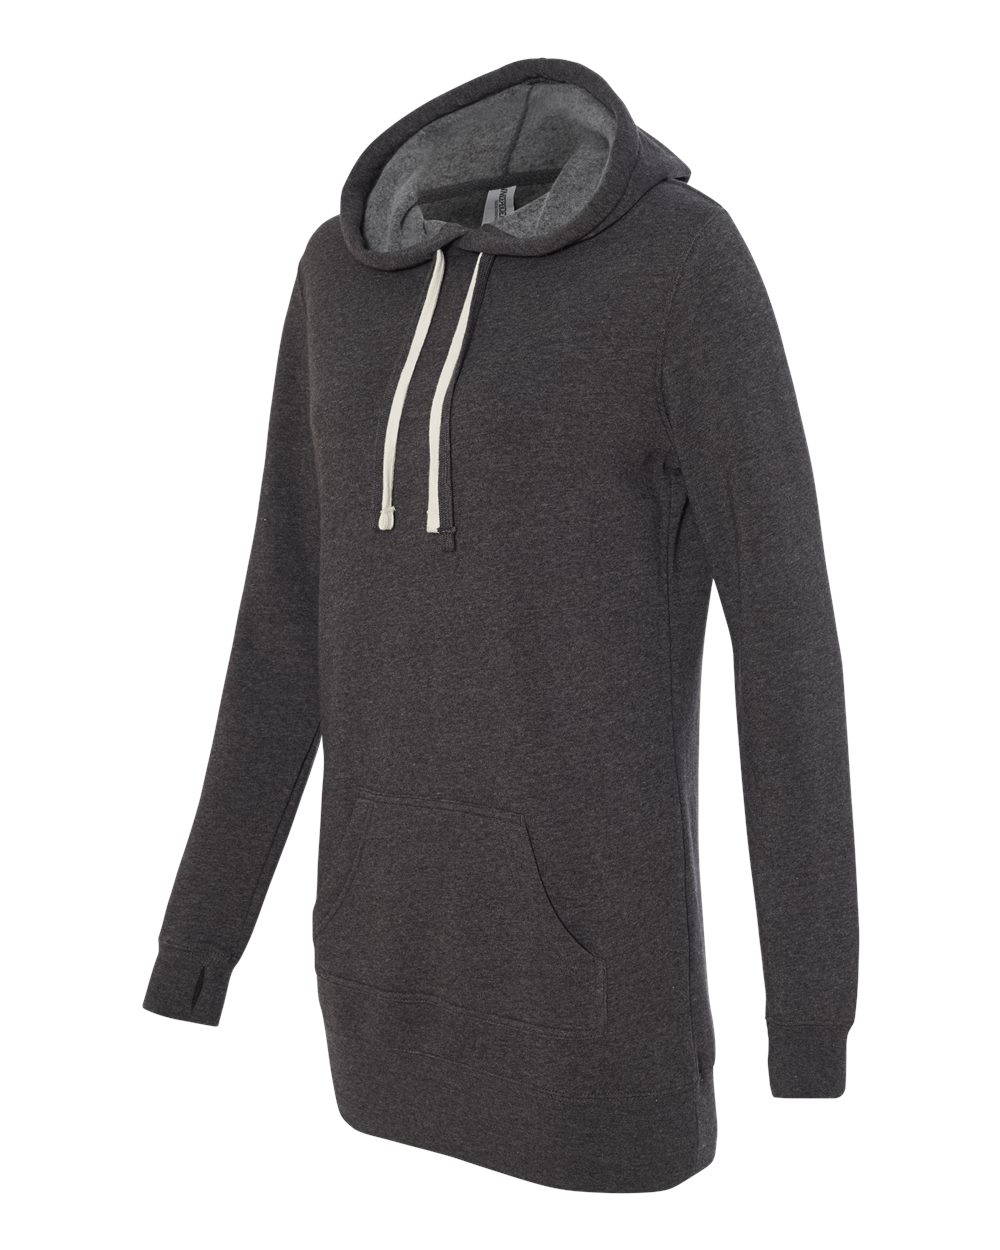 Independent Trading Co. PRM65DRS - Women's Special Blend Hooded Pullover Dress